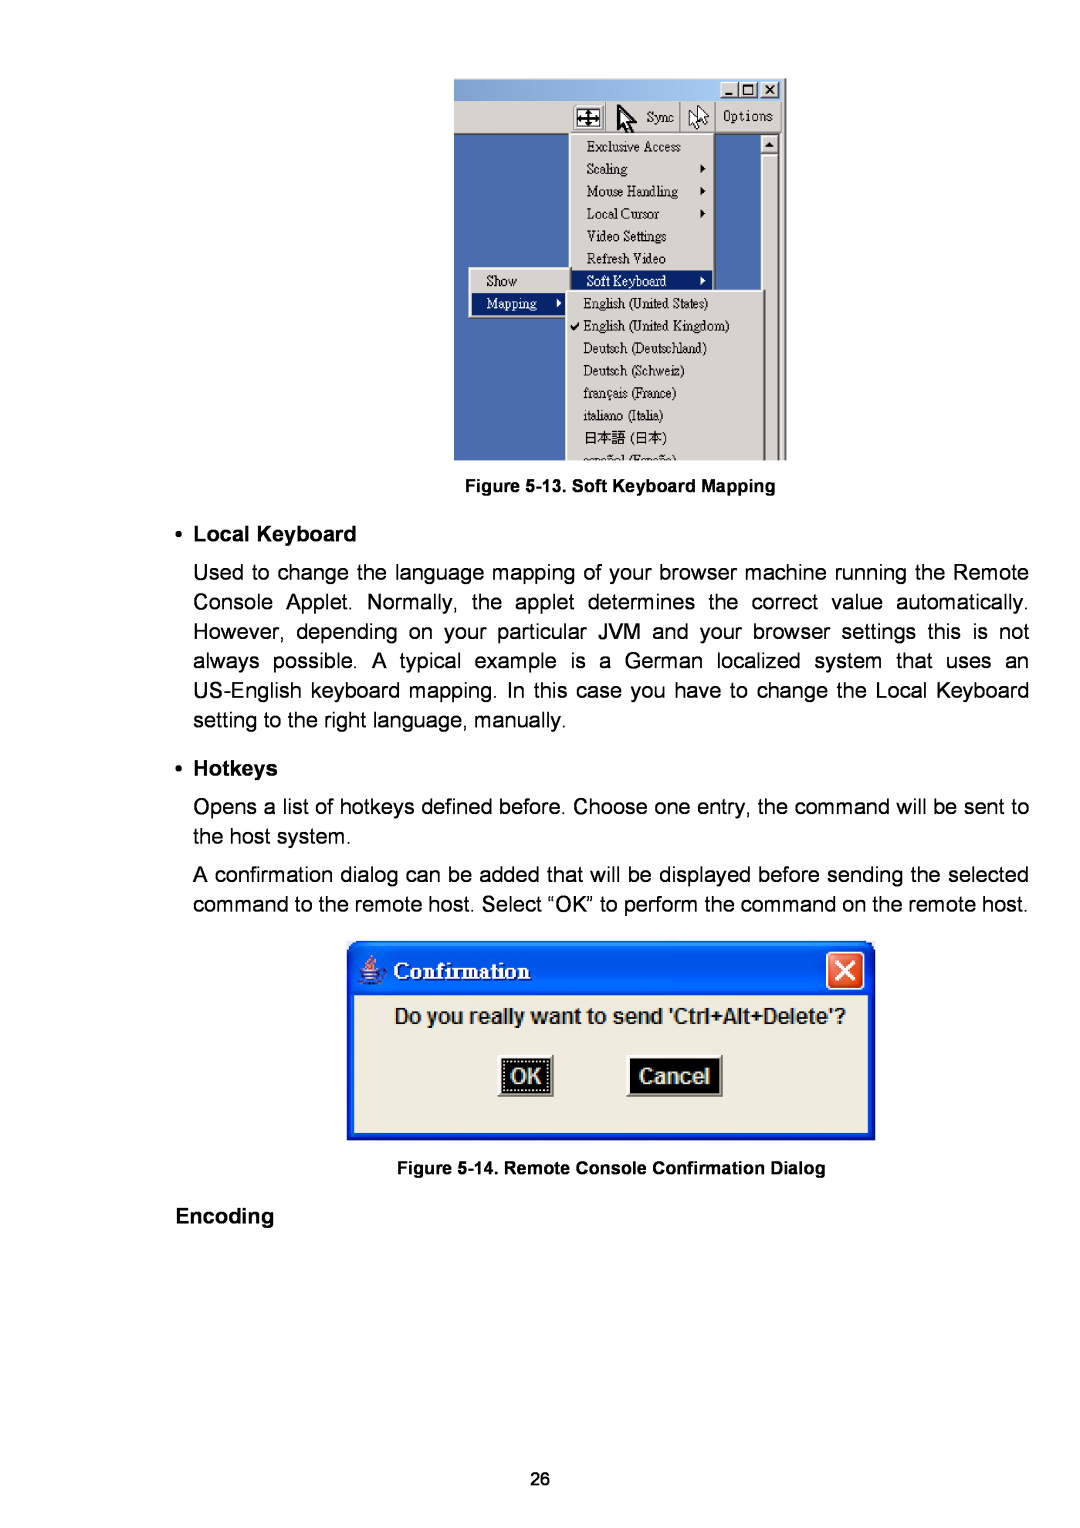 D-Link DKVM-IP1 manual Local Keyboard, Hotkeys, Encoding, 13. Soft Keyboard Mapping, 14. Remote Console Confirmation Dialog 